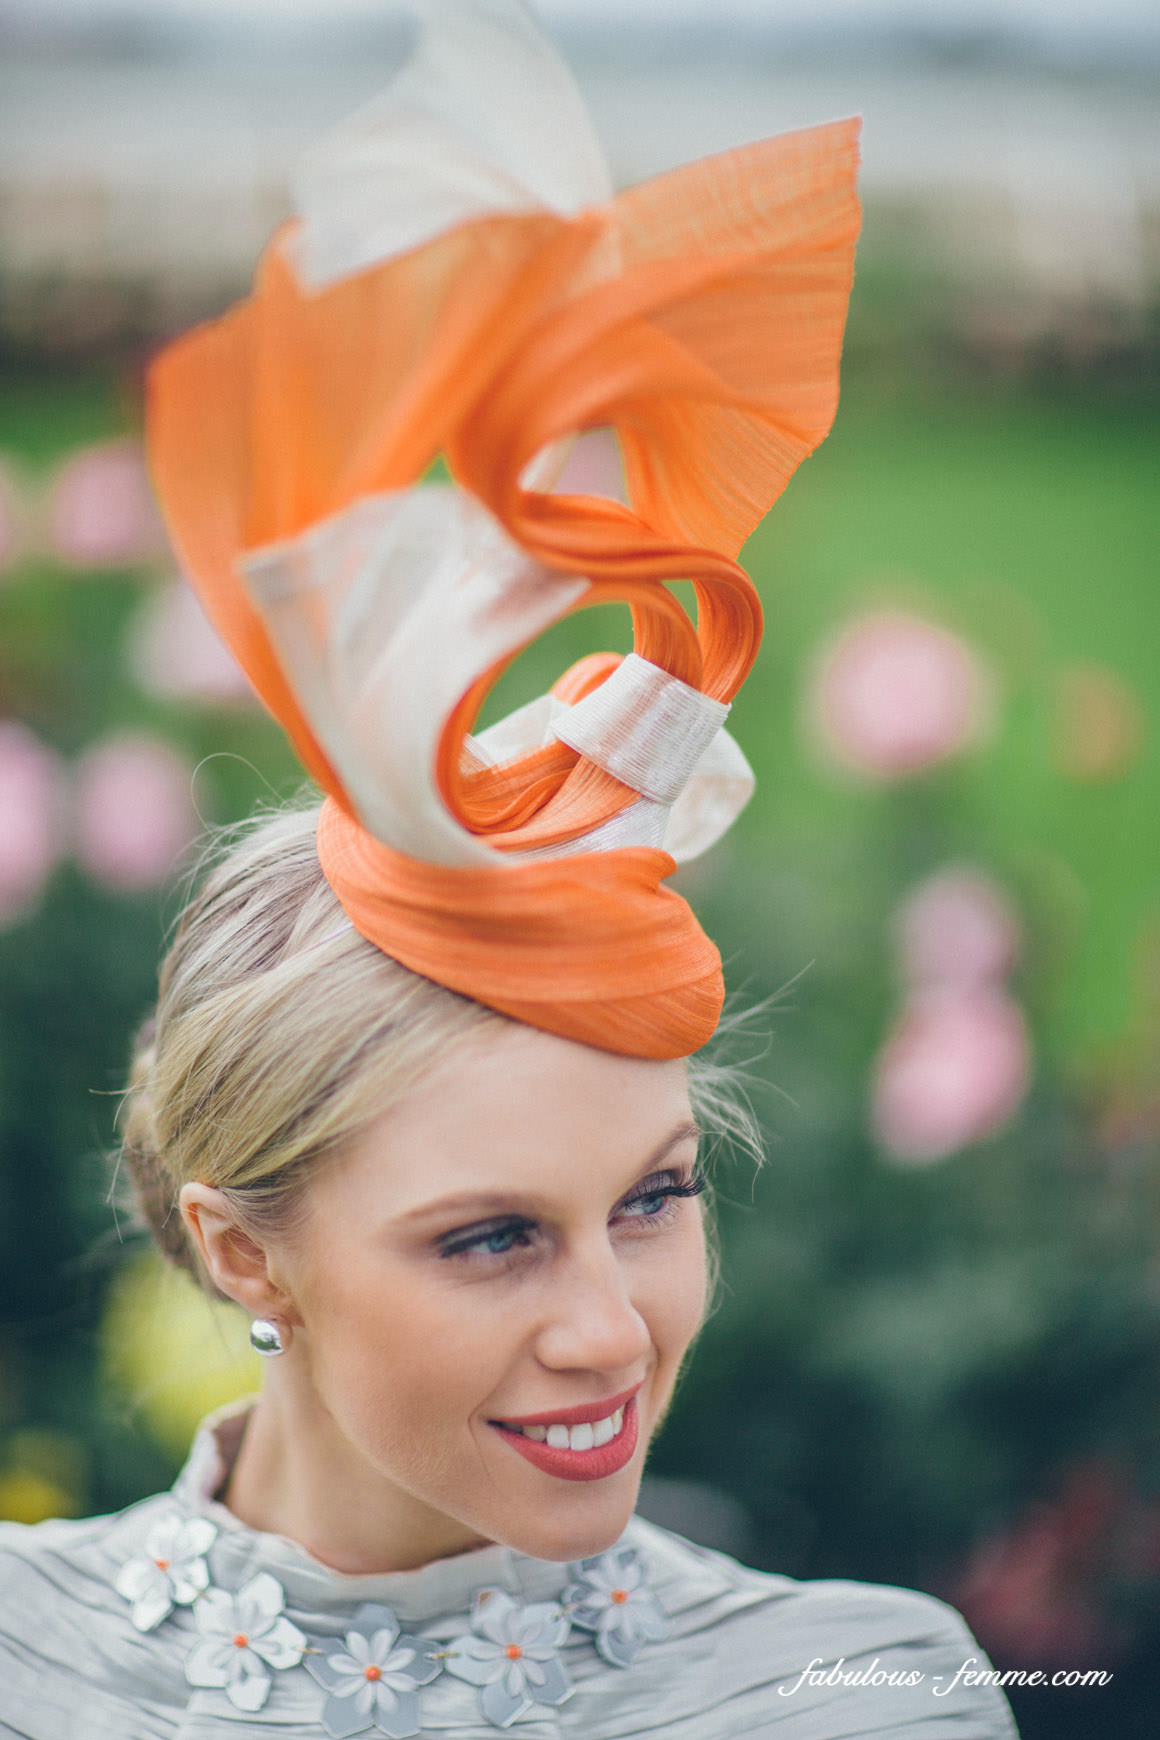 Australian Finals - Fashions on the Field 2013 - Melbourne Cup